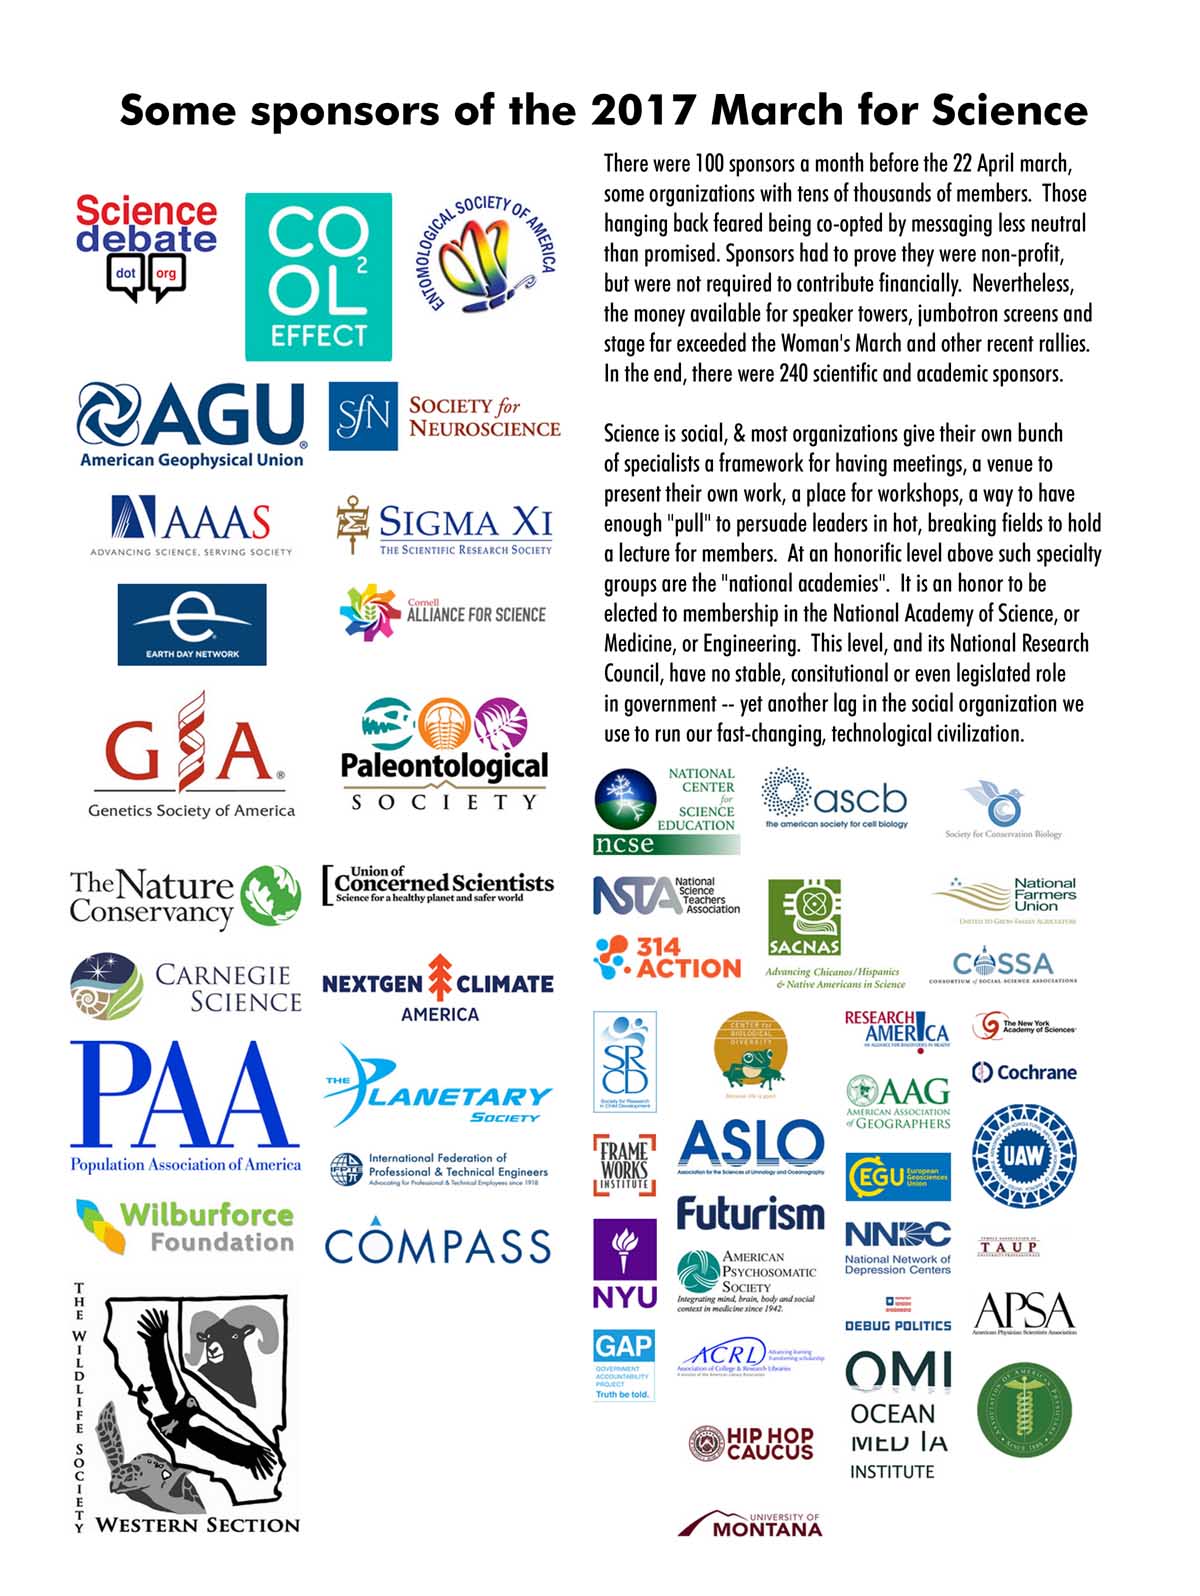 March for Science had 240 sponsors.